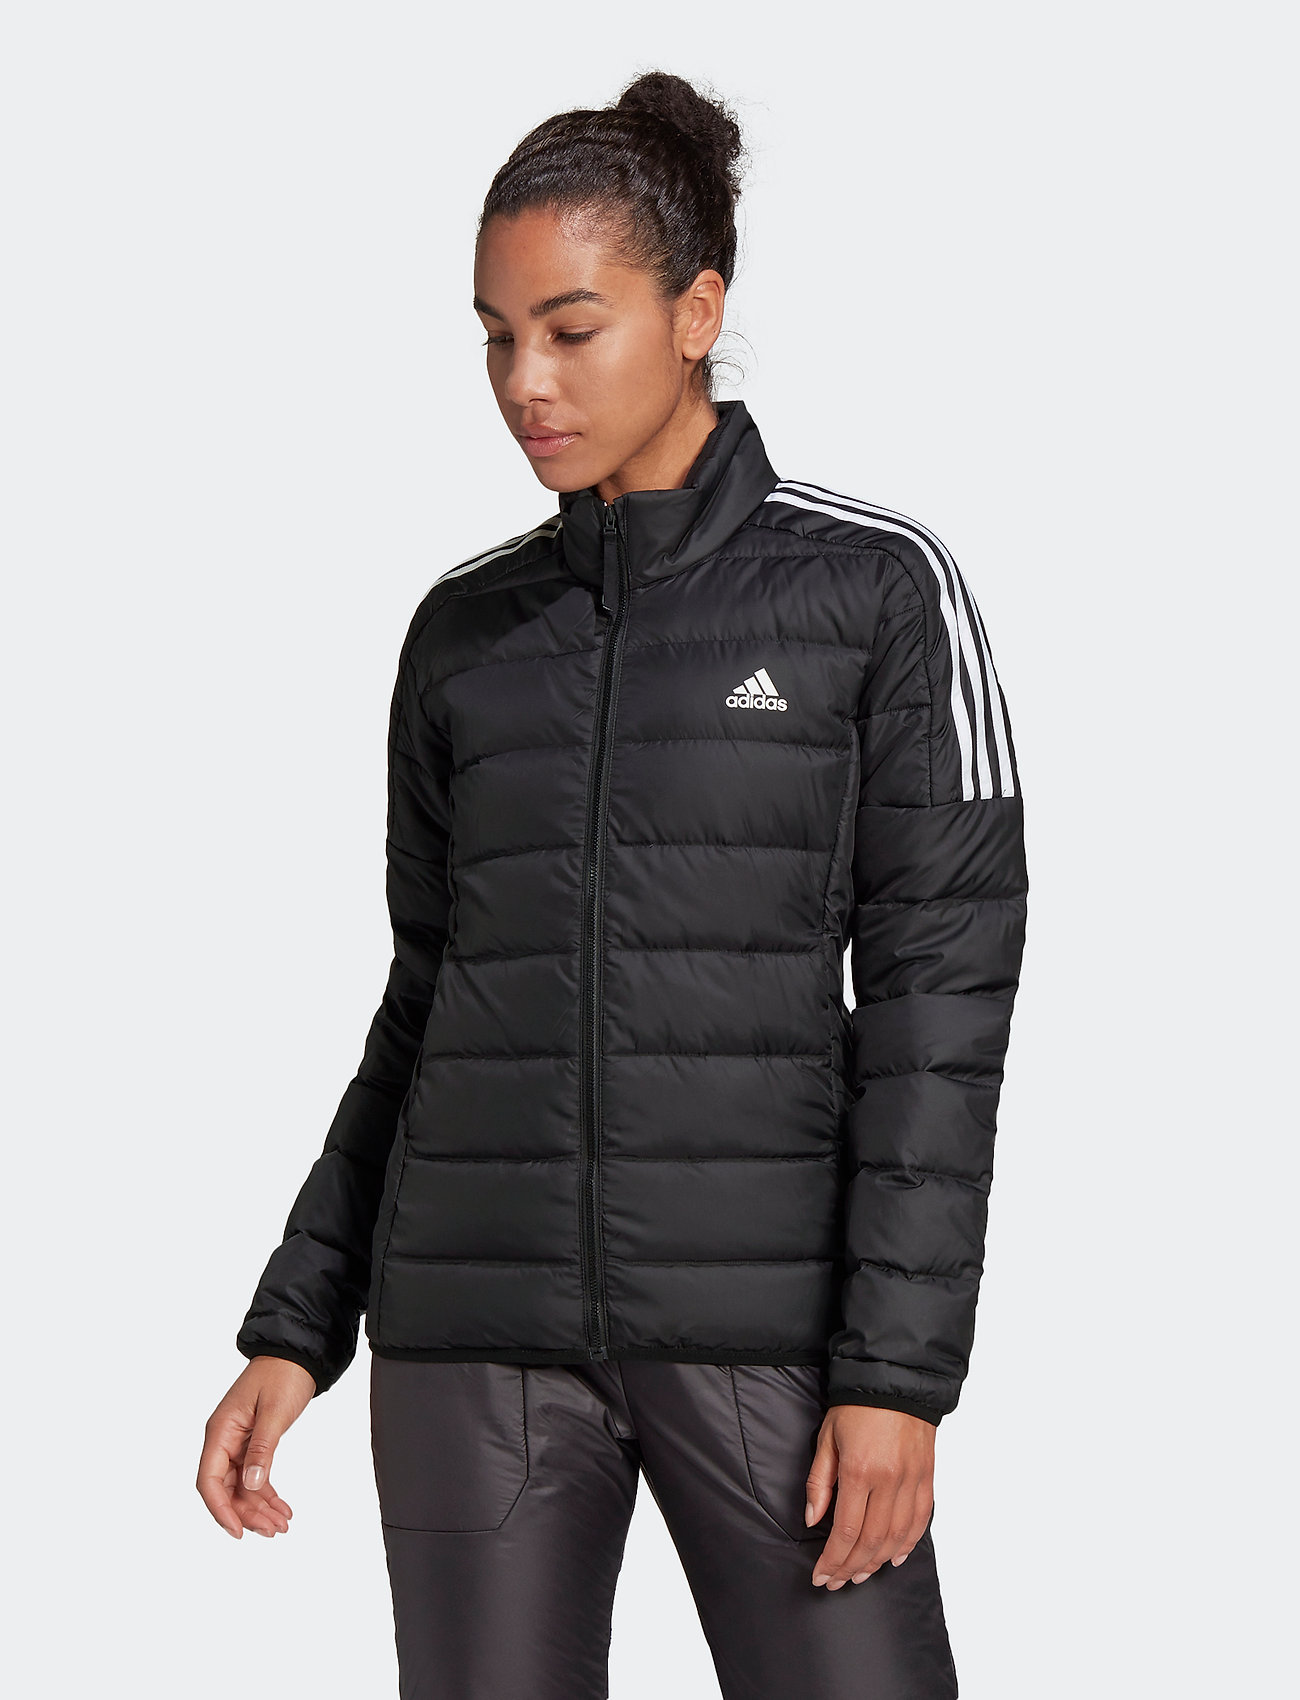 chokolade tørst Teknologi adidas Performance Essentials Down Jacket - 64.80 €. Buy Down- & padded  jackets from adidas Performance online at Boozt.com. Fast delivery and easy  returns